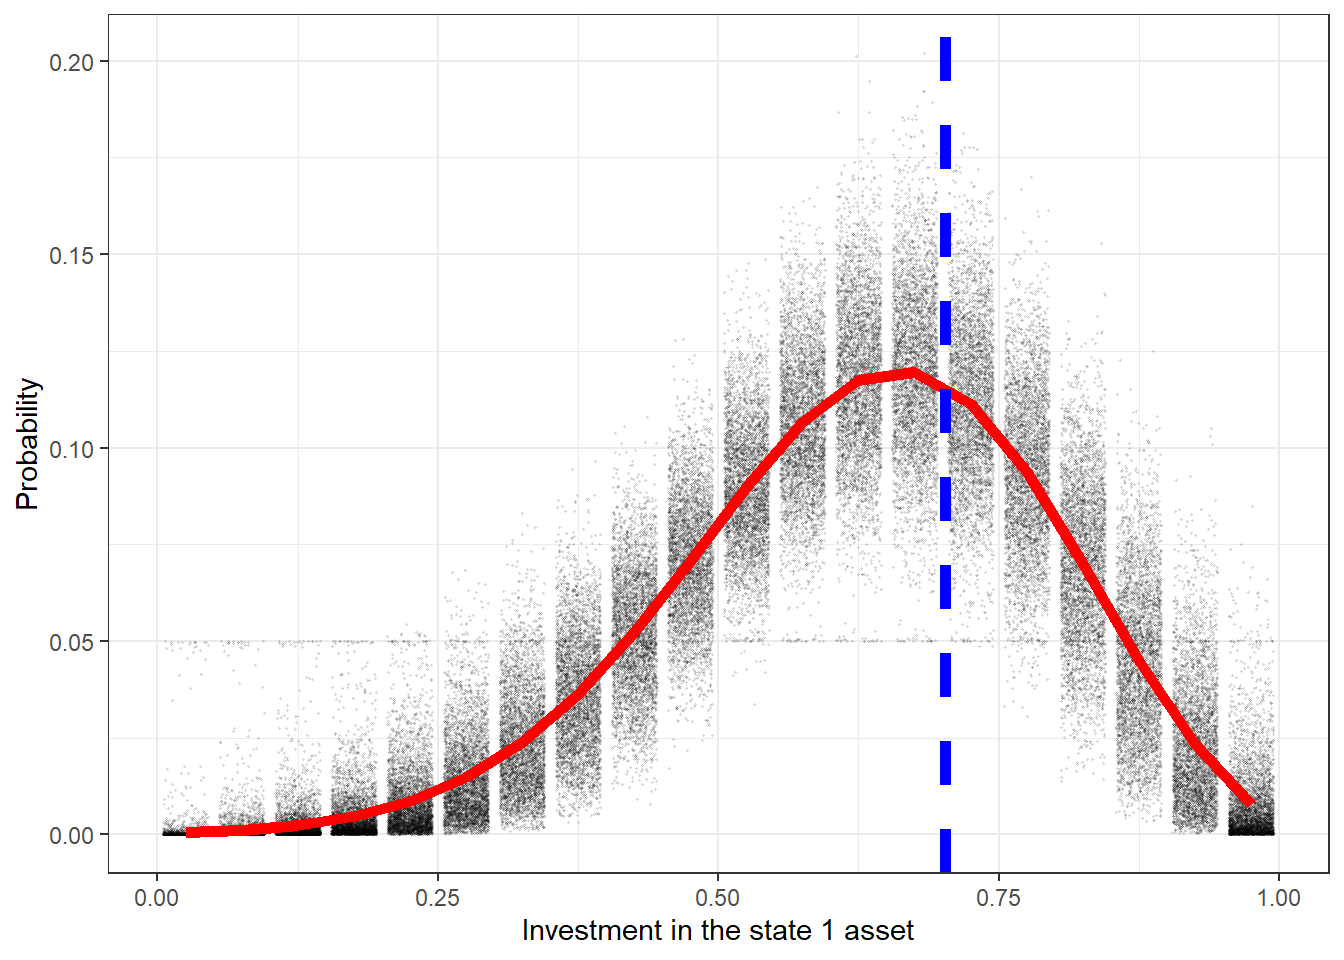 Posterior predictive distribution for the participant. Dots show draws from the individual posterior distribution. The red curve shows the mean of this predictive distribution. The dashed blue line shows the choice that was made by the participant.